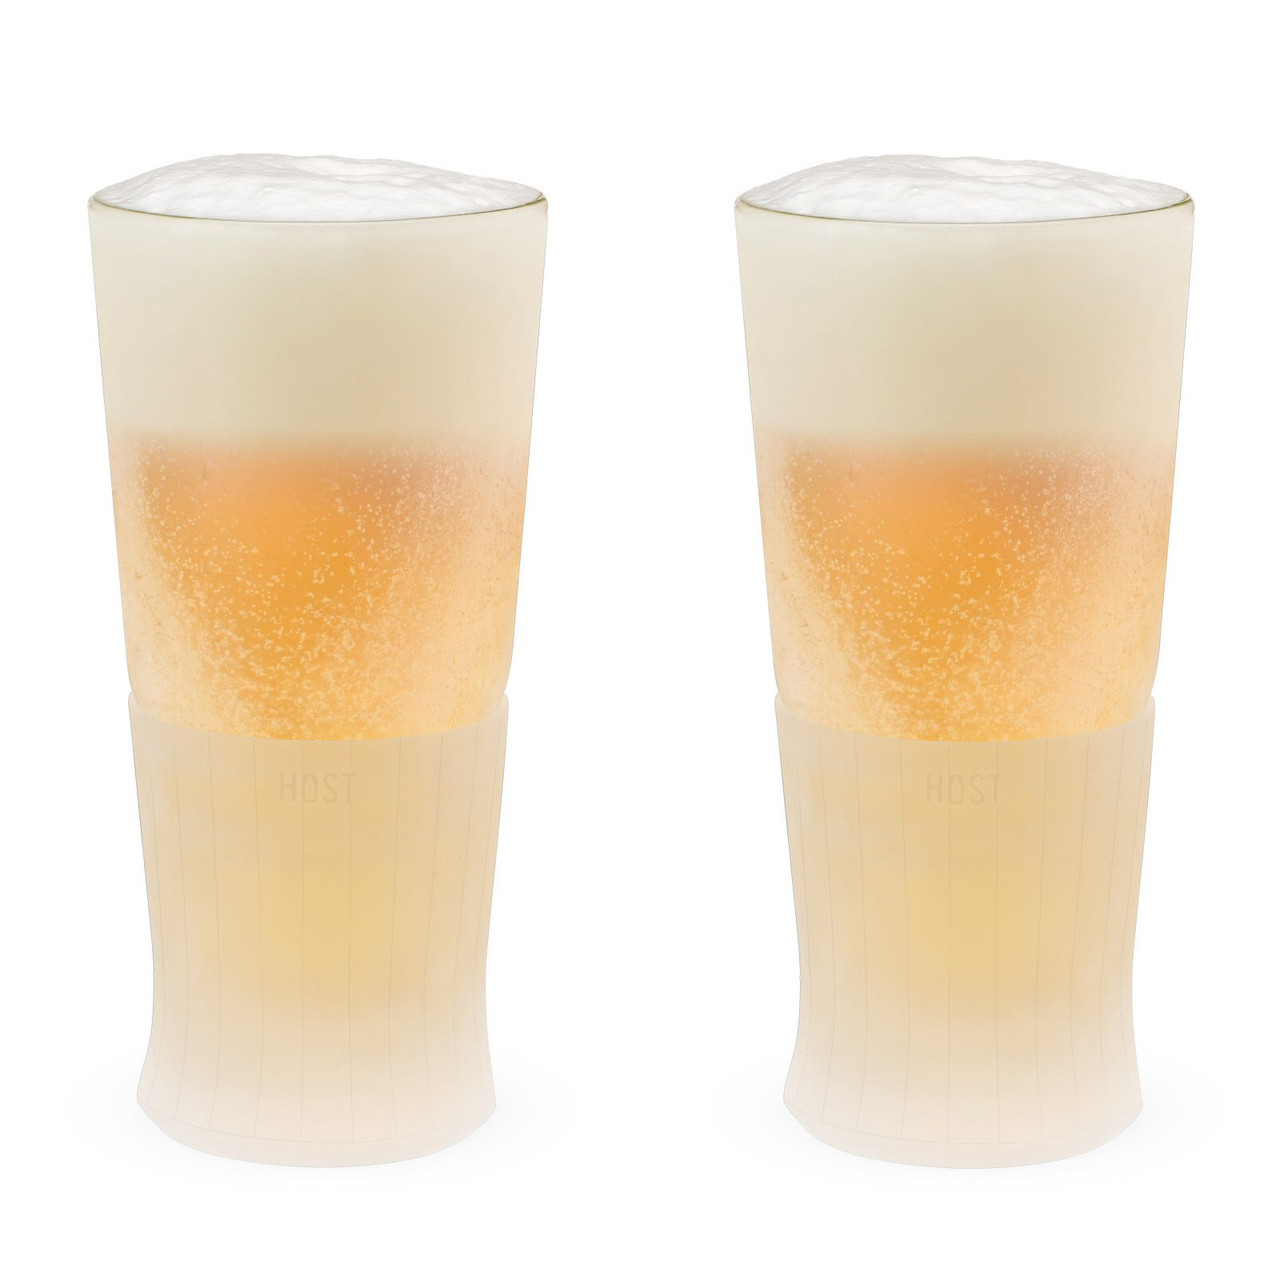 Host FREEZE Beer Glasses, Frozen Beer Mugs, Freezable Pint Glass Set,  Insulated Beer Glass to Keep Your Drinks Cold, Double Walled Insulated  Glasses